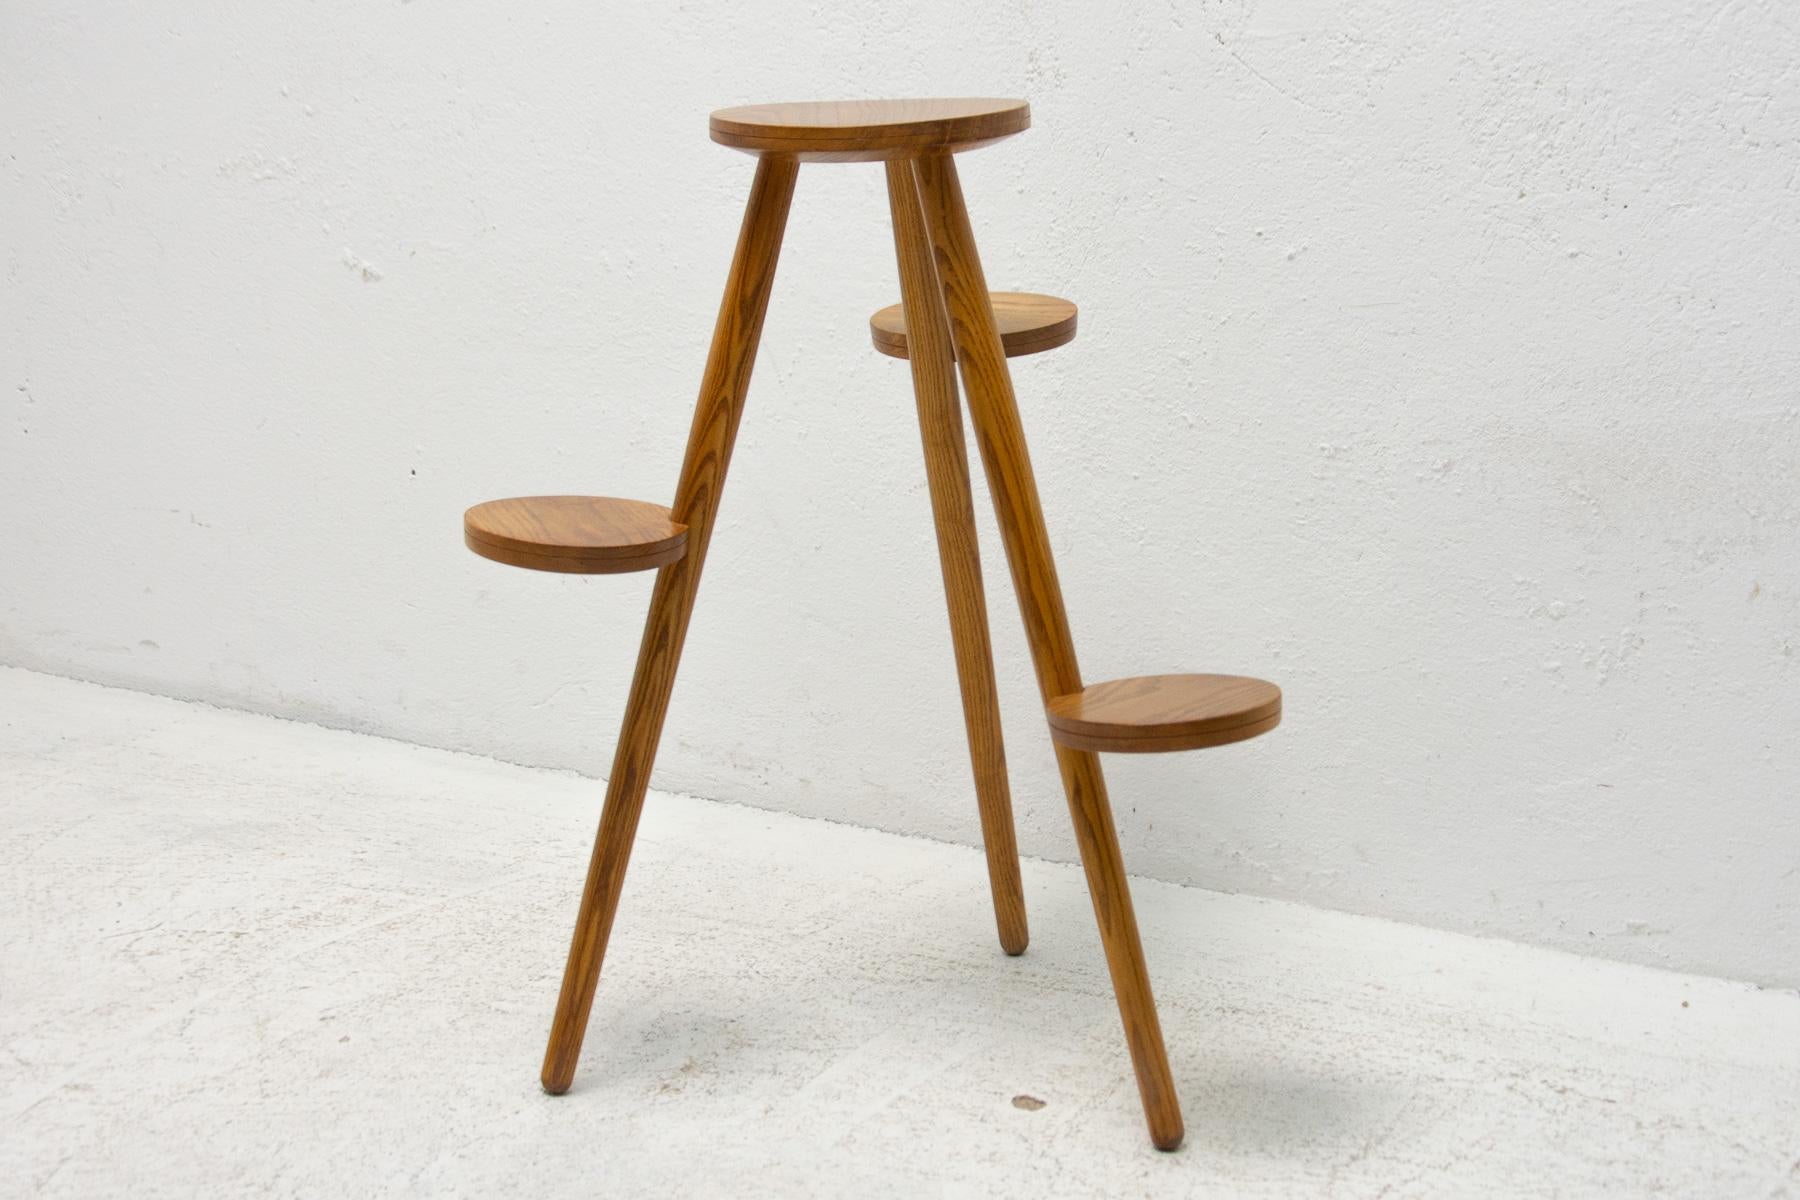 Small vintage table/plant stand in beech wood. It was made by Krásná Jizba company in the former Czechoslovakia in the 1950´s. In excellent condition, fully renovated.